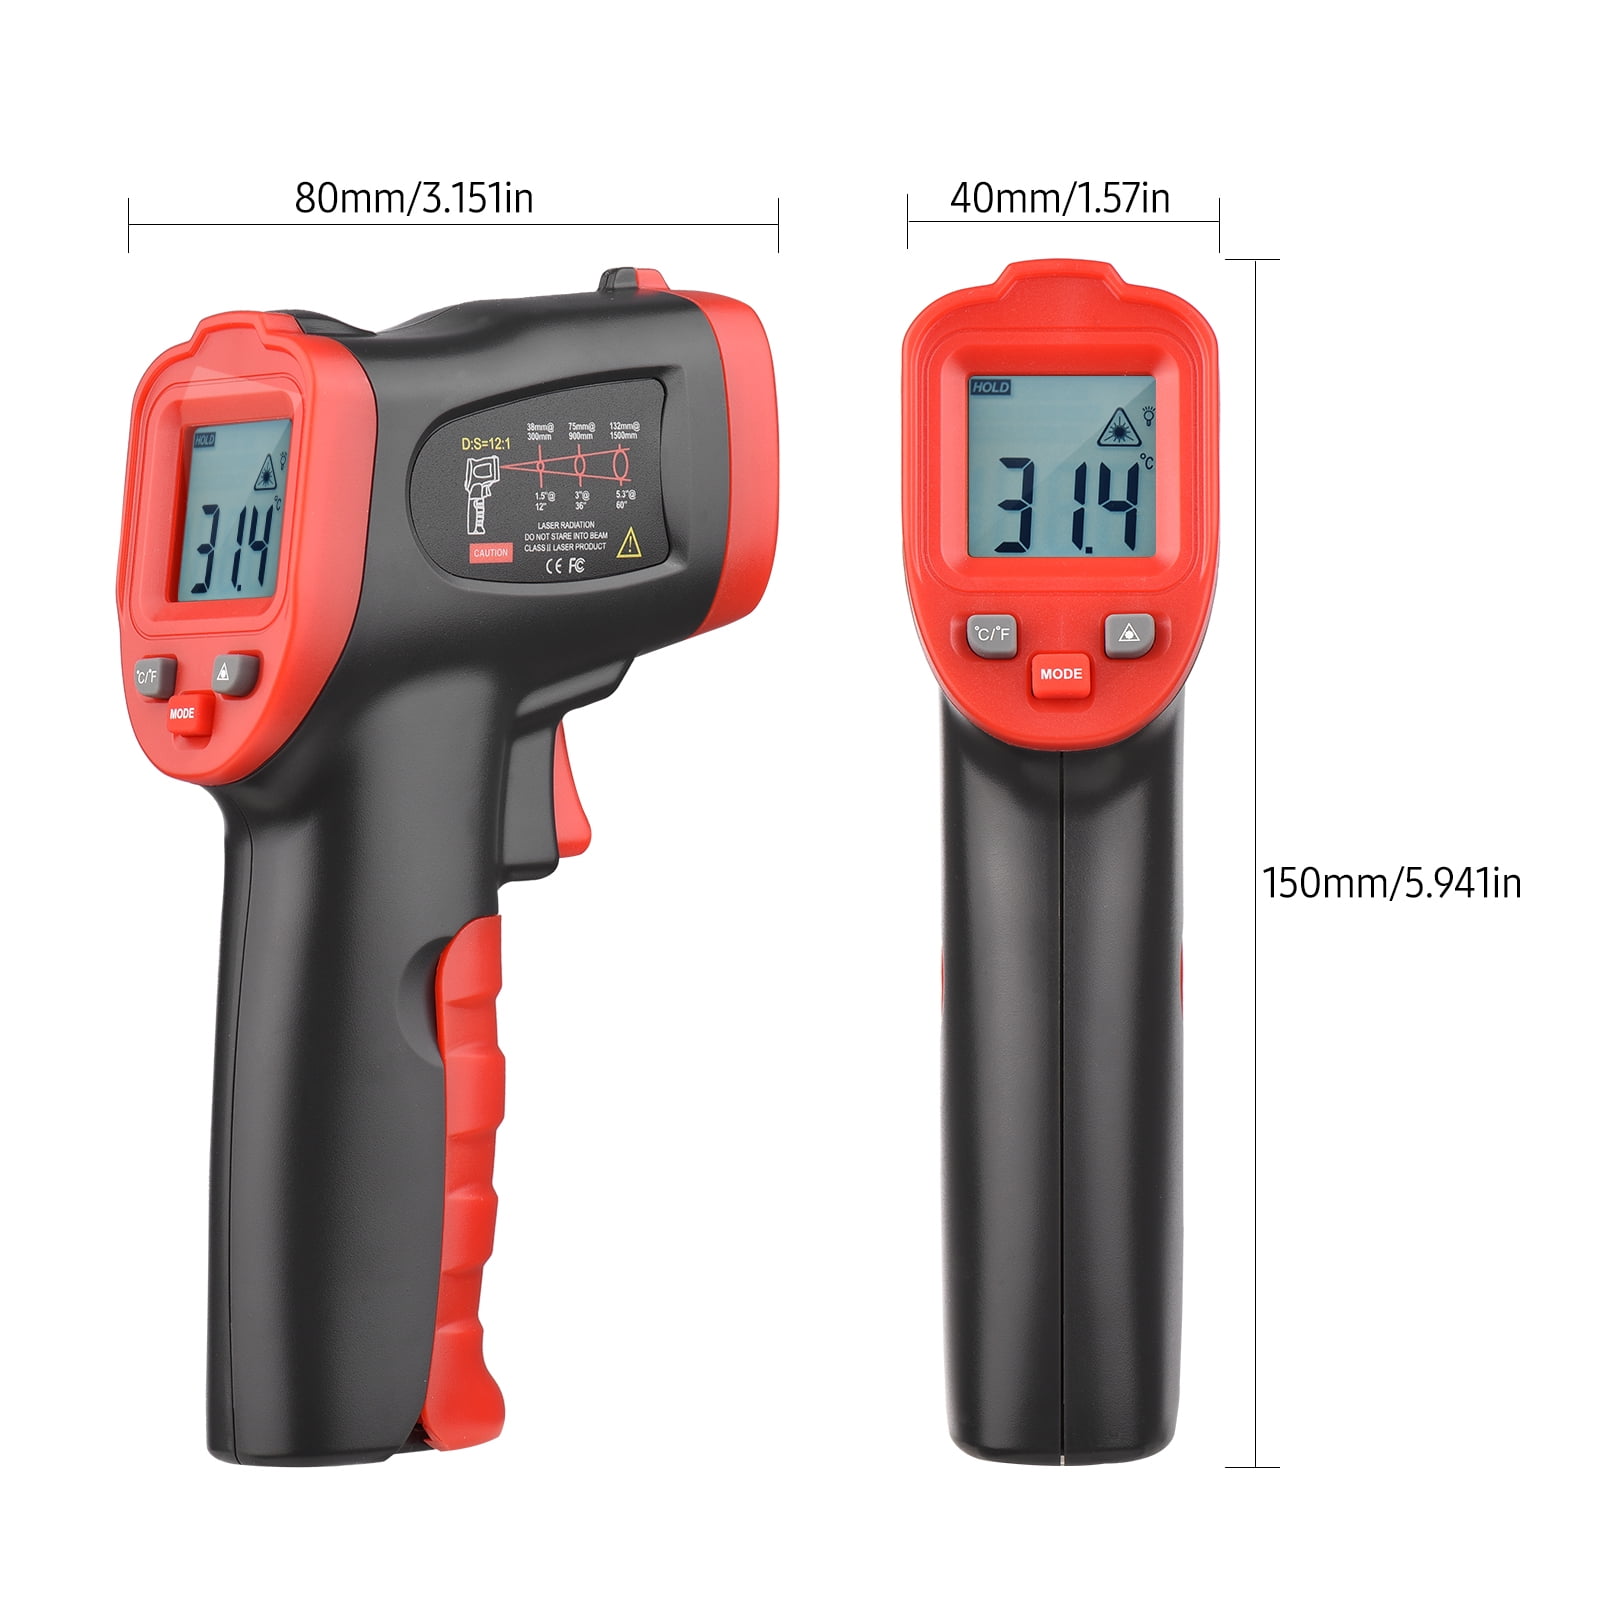 PTC Surface Temperature Thermometer Model 3117